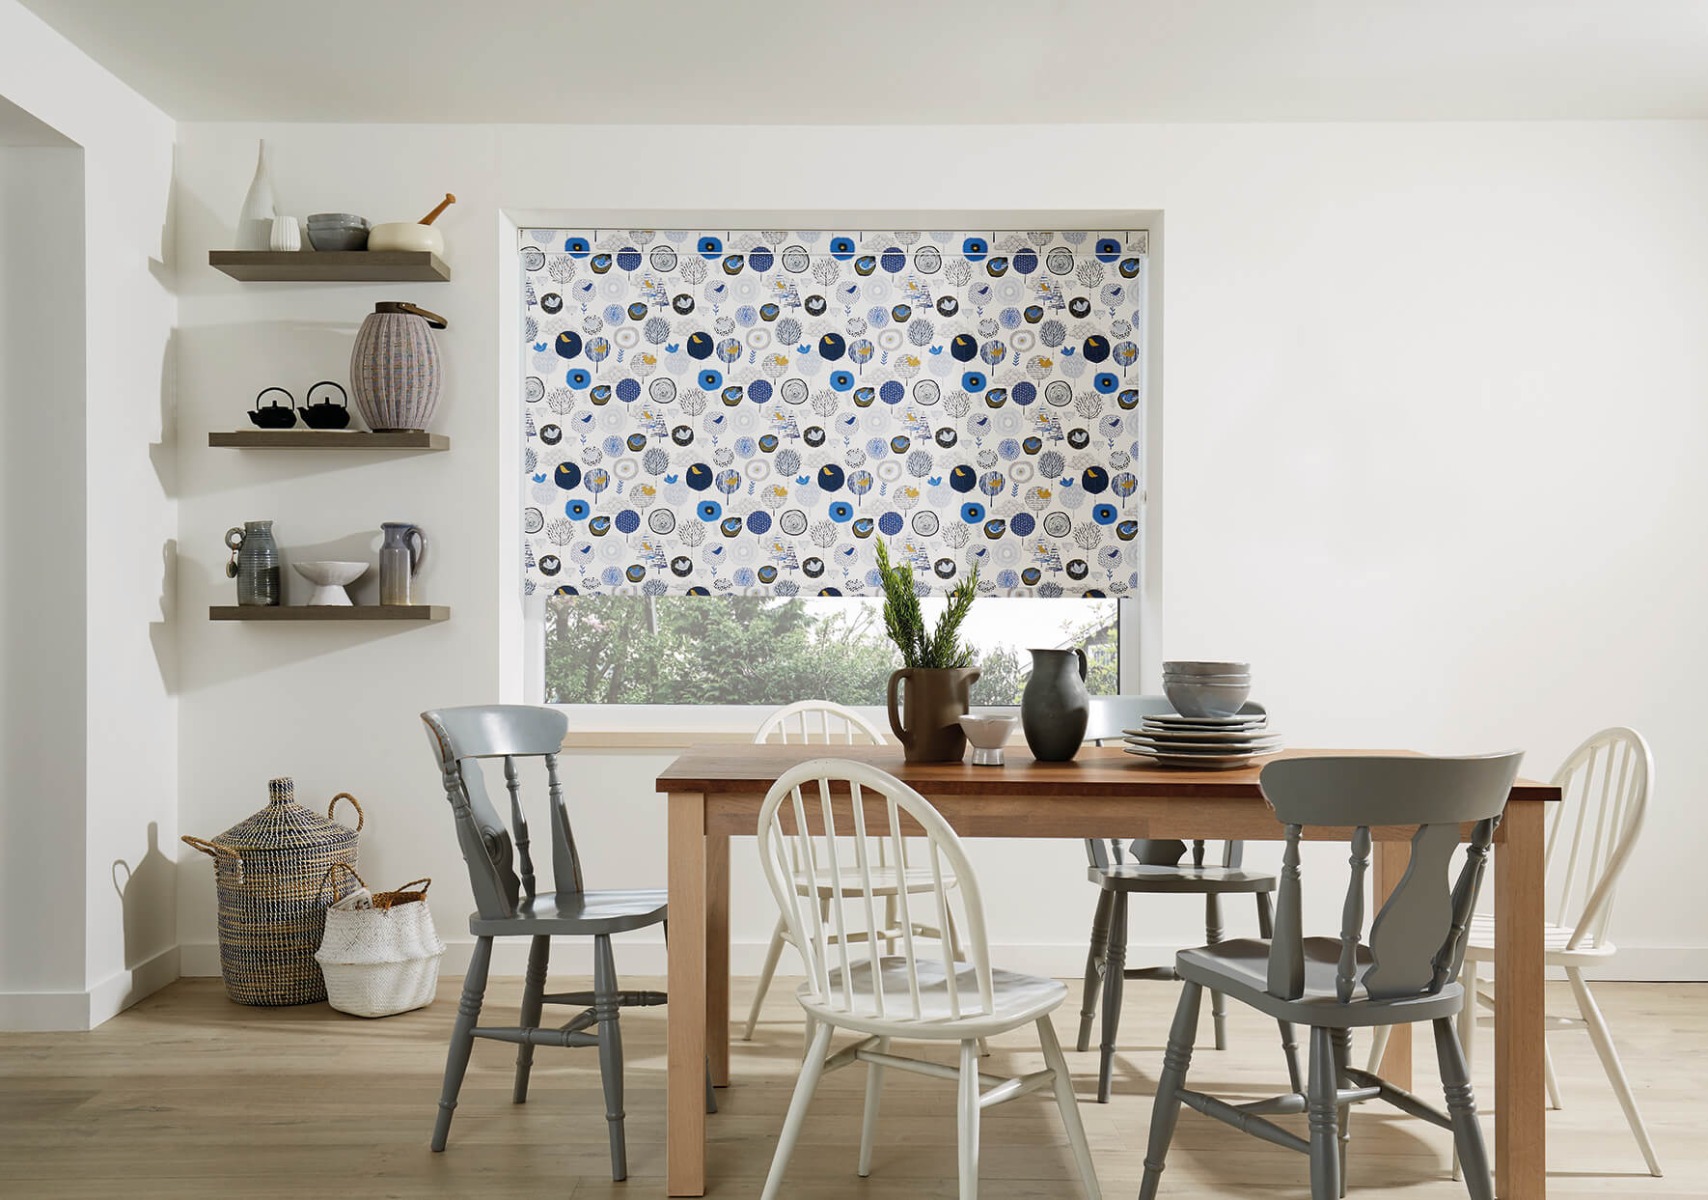 What is a roller blind?